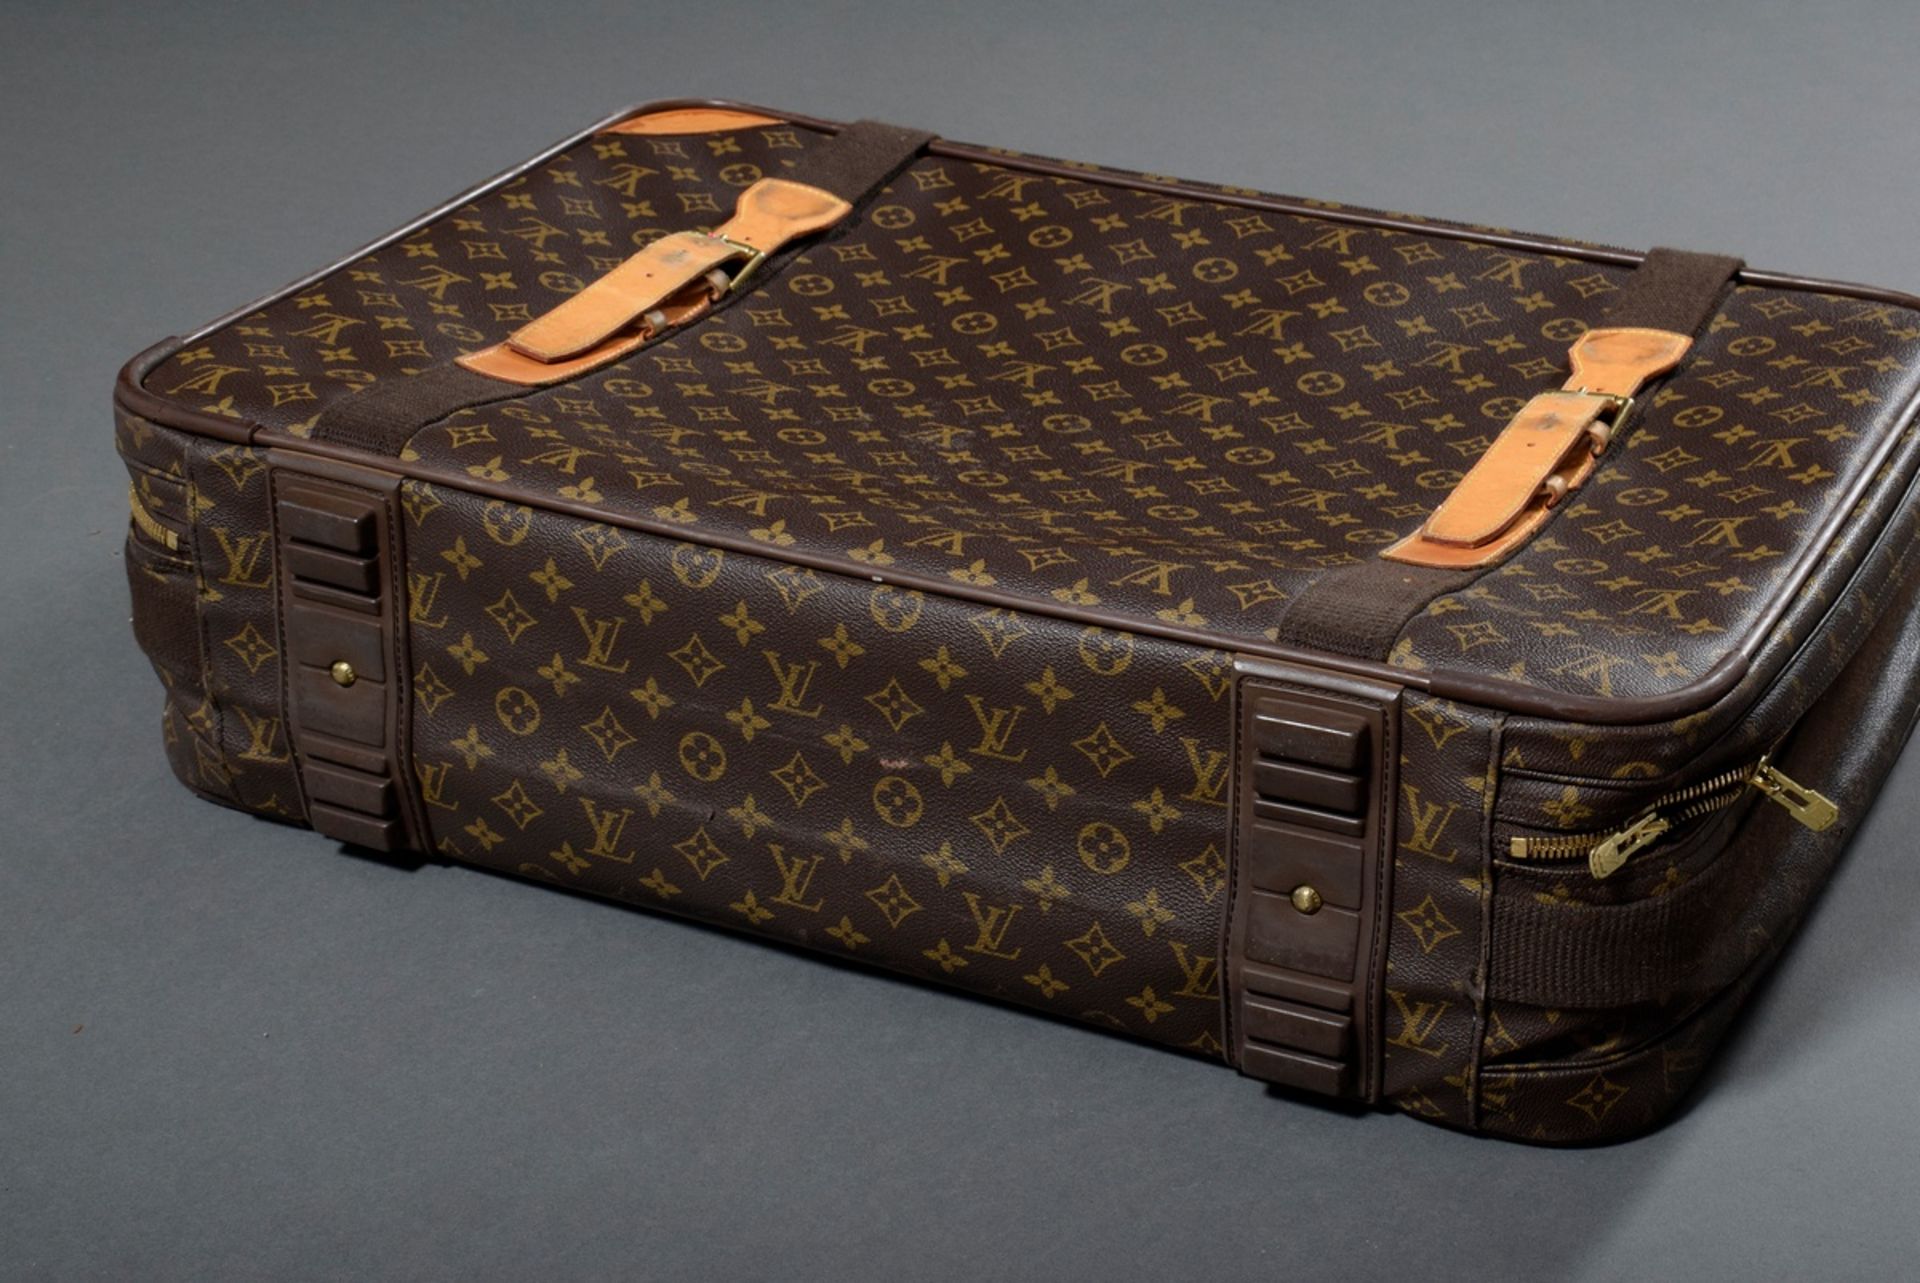 Louis Vuitton suitcase "Satellite 70" in monogrammed canvas with light cowhide details, gold-colour - Image 4 of 6